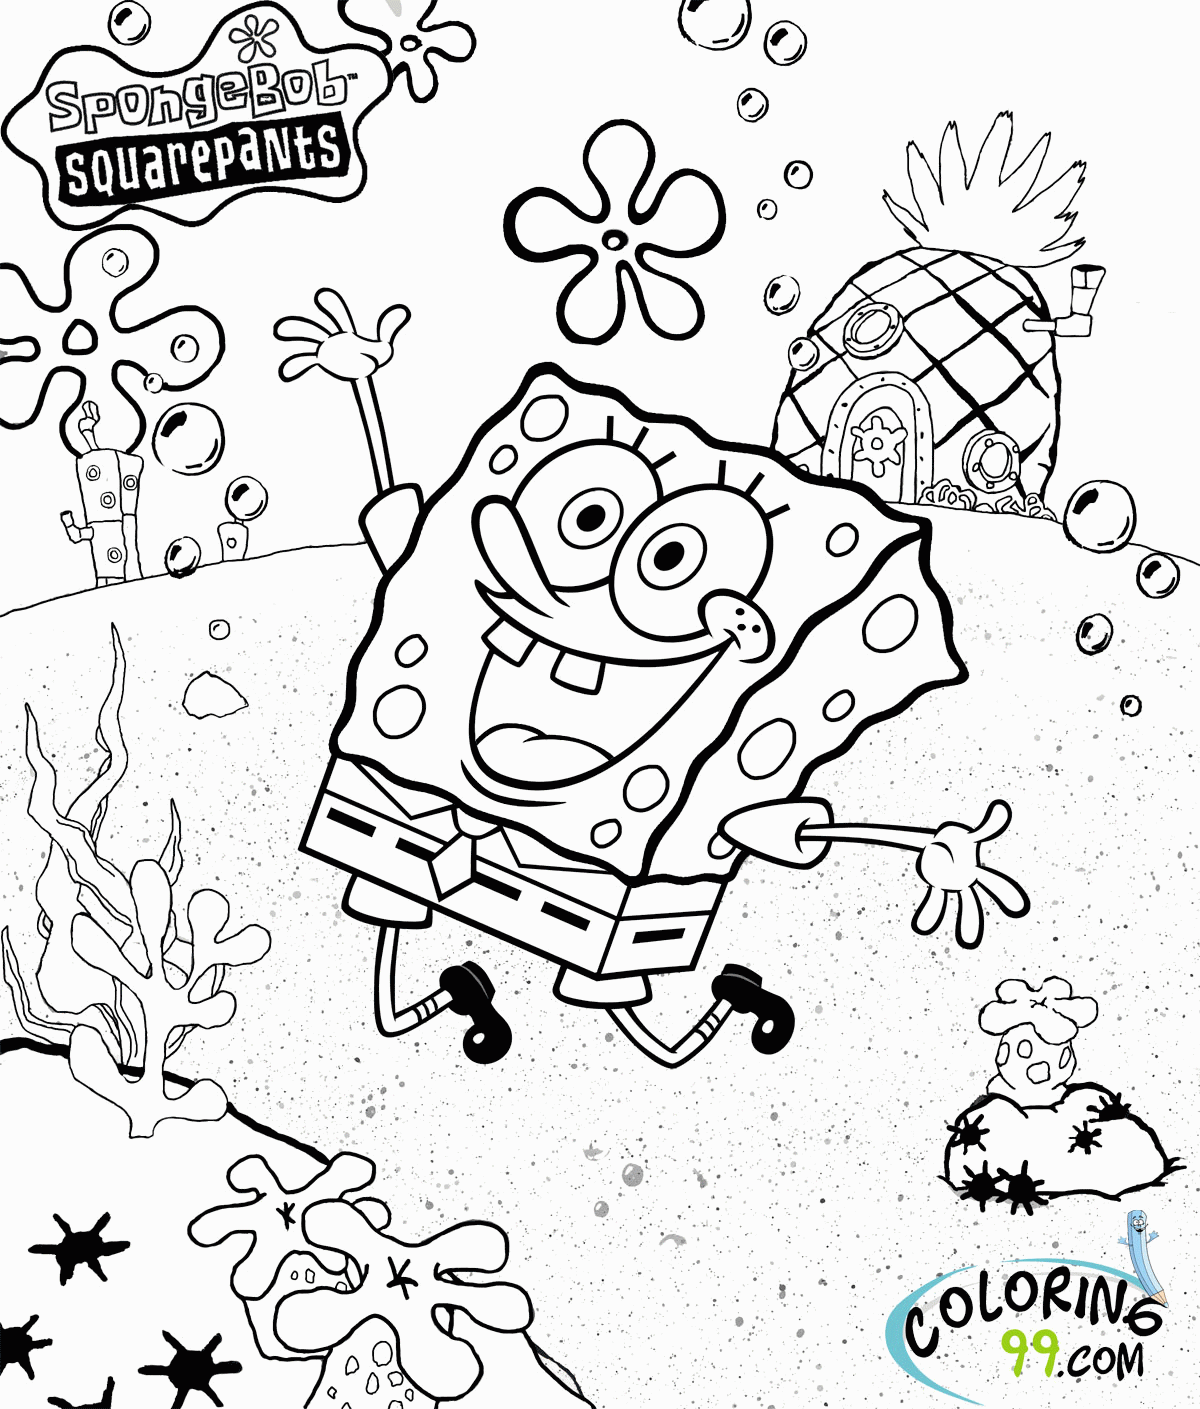 spongebob-and-gary-coloring-pages-coloring-home